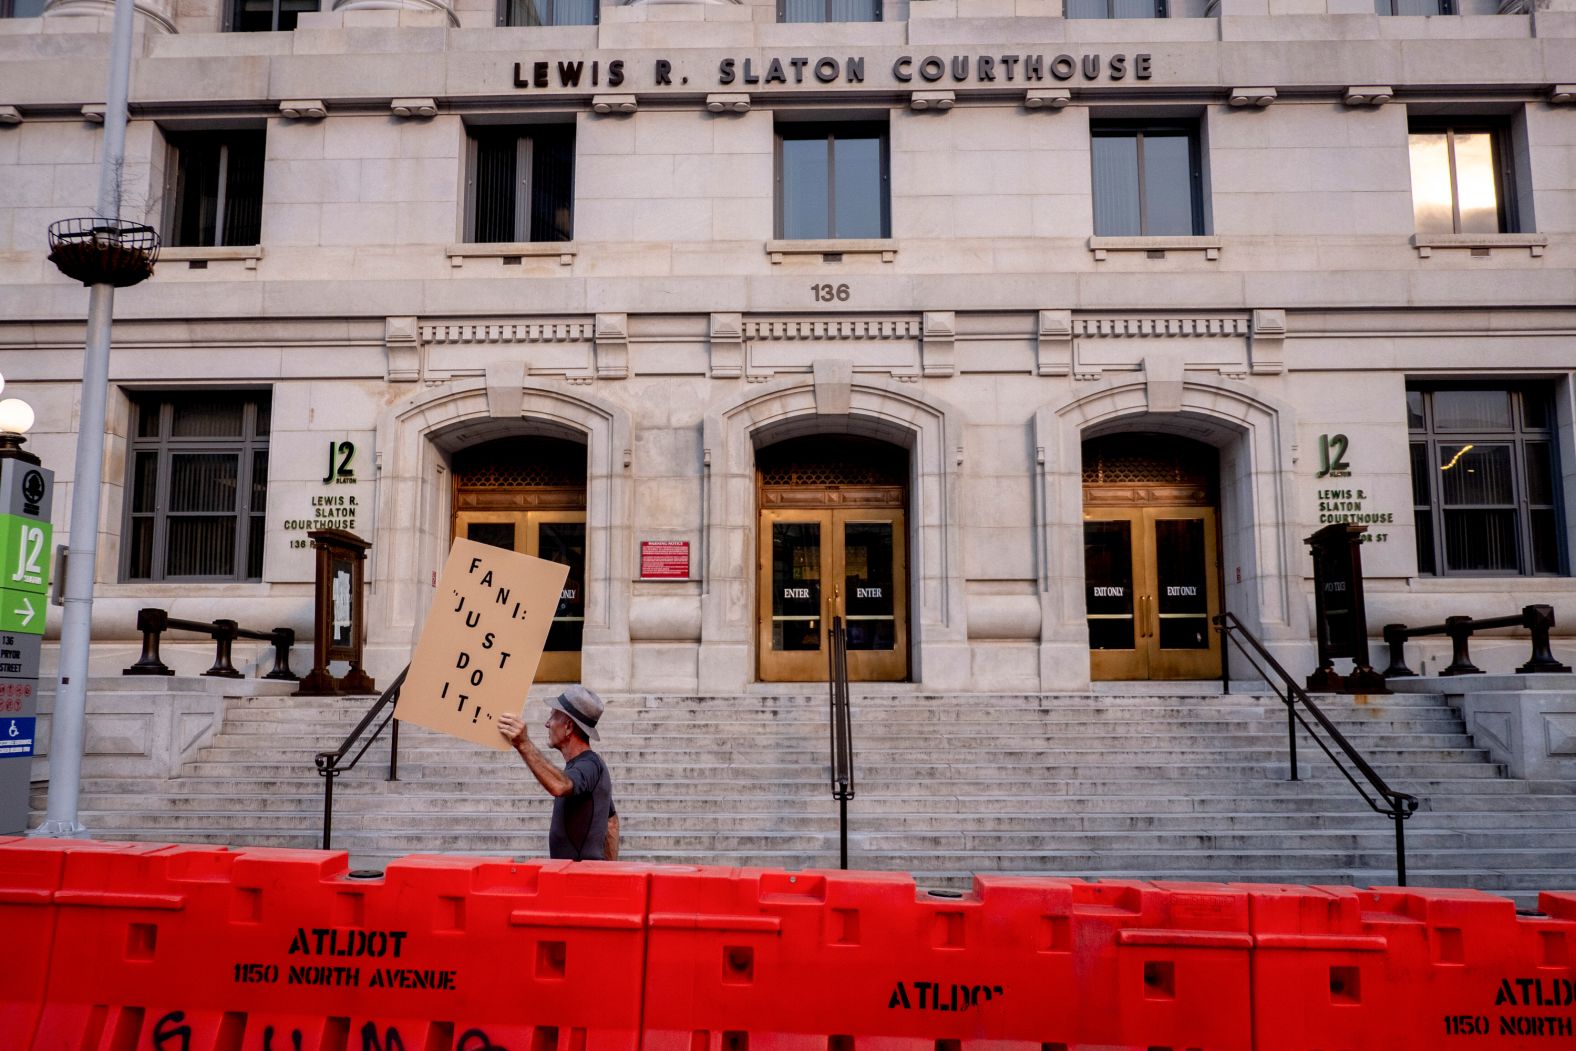 A protester carries a sign saying "Fani: Just do it!" outside the courthouse on August 14.